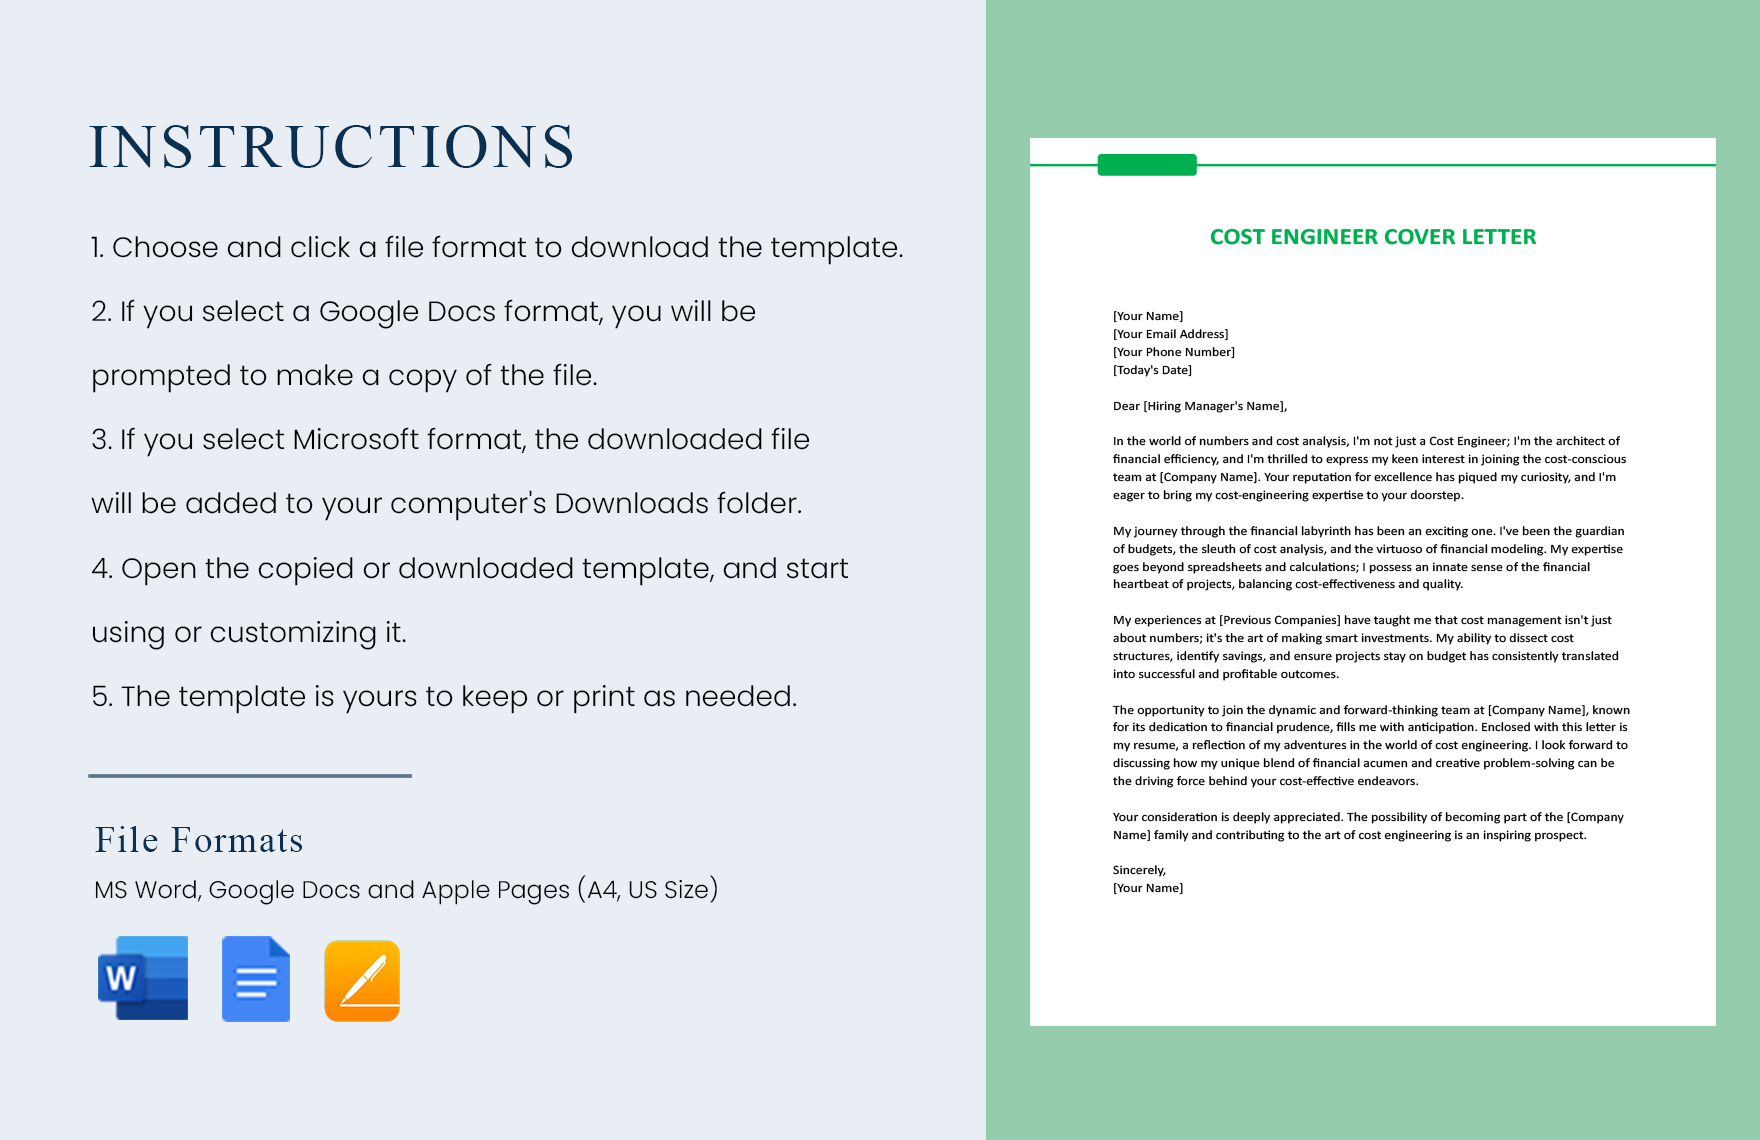 Cost Engineer Cover Letter